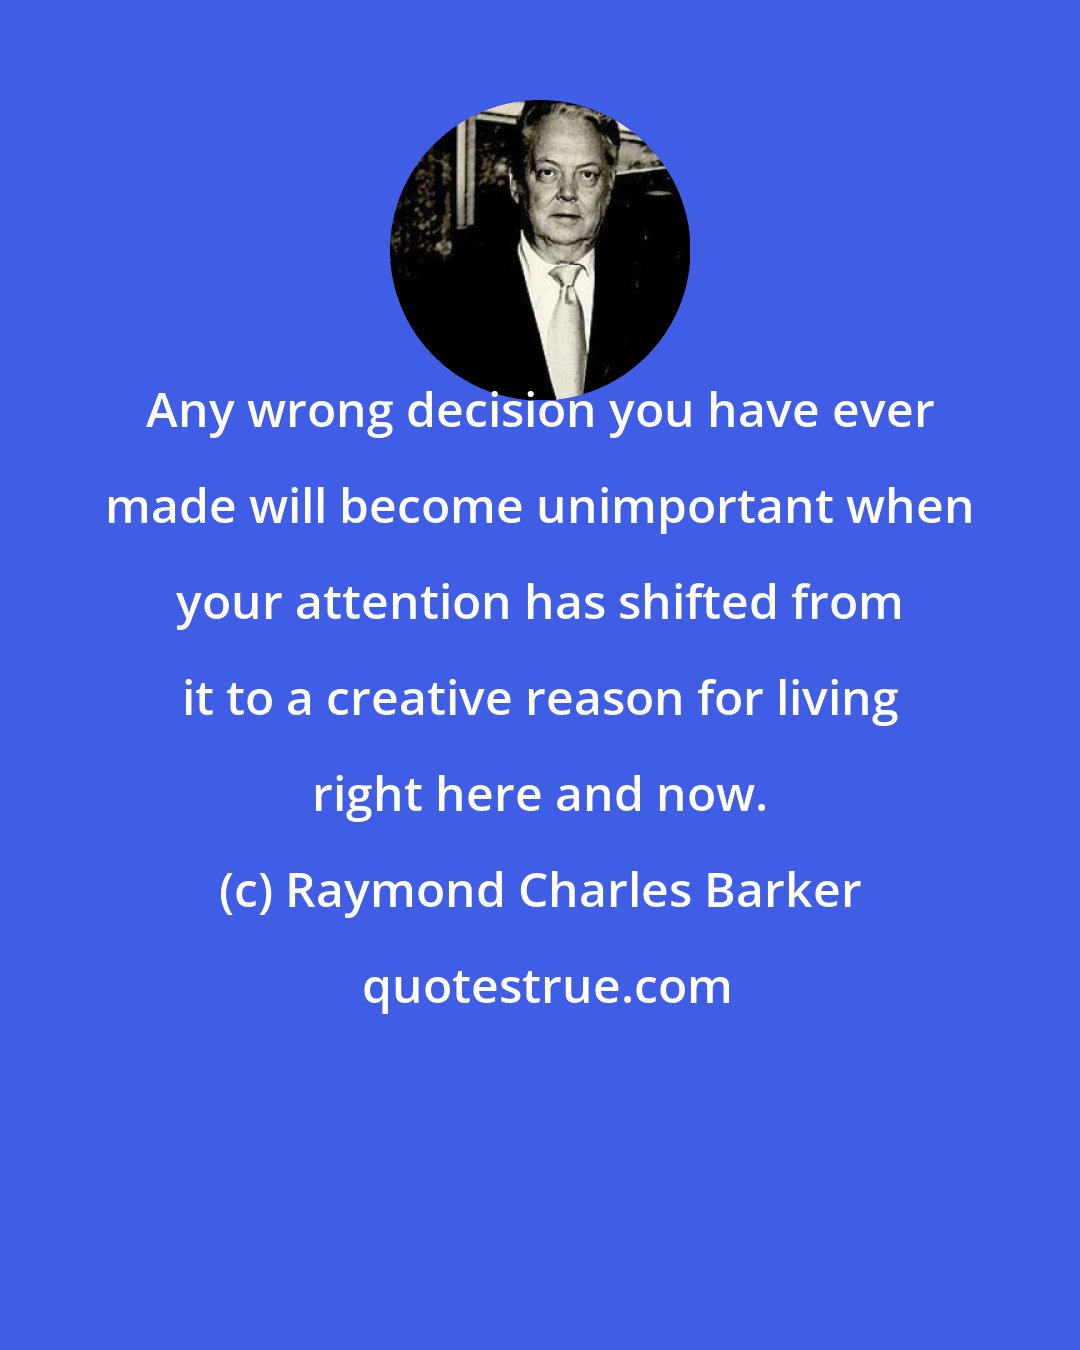 Raymond Charles Barker: Any wrong decision you have ever made will become unimportant when your attention has shifted from it to a creative reason for living right here and now.